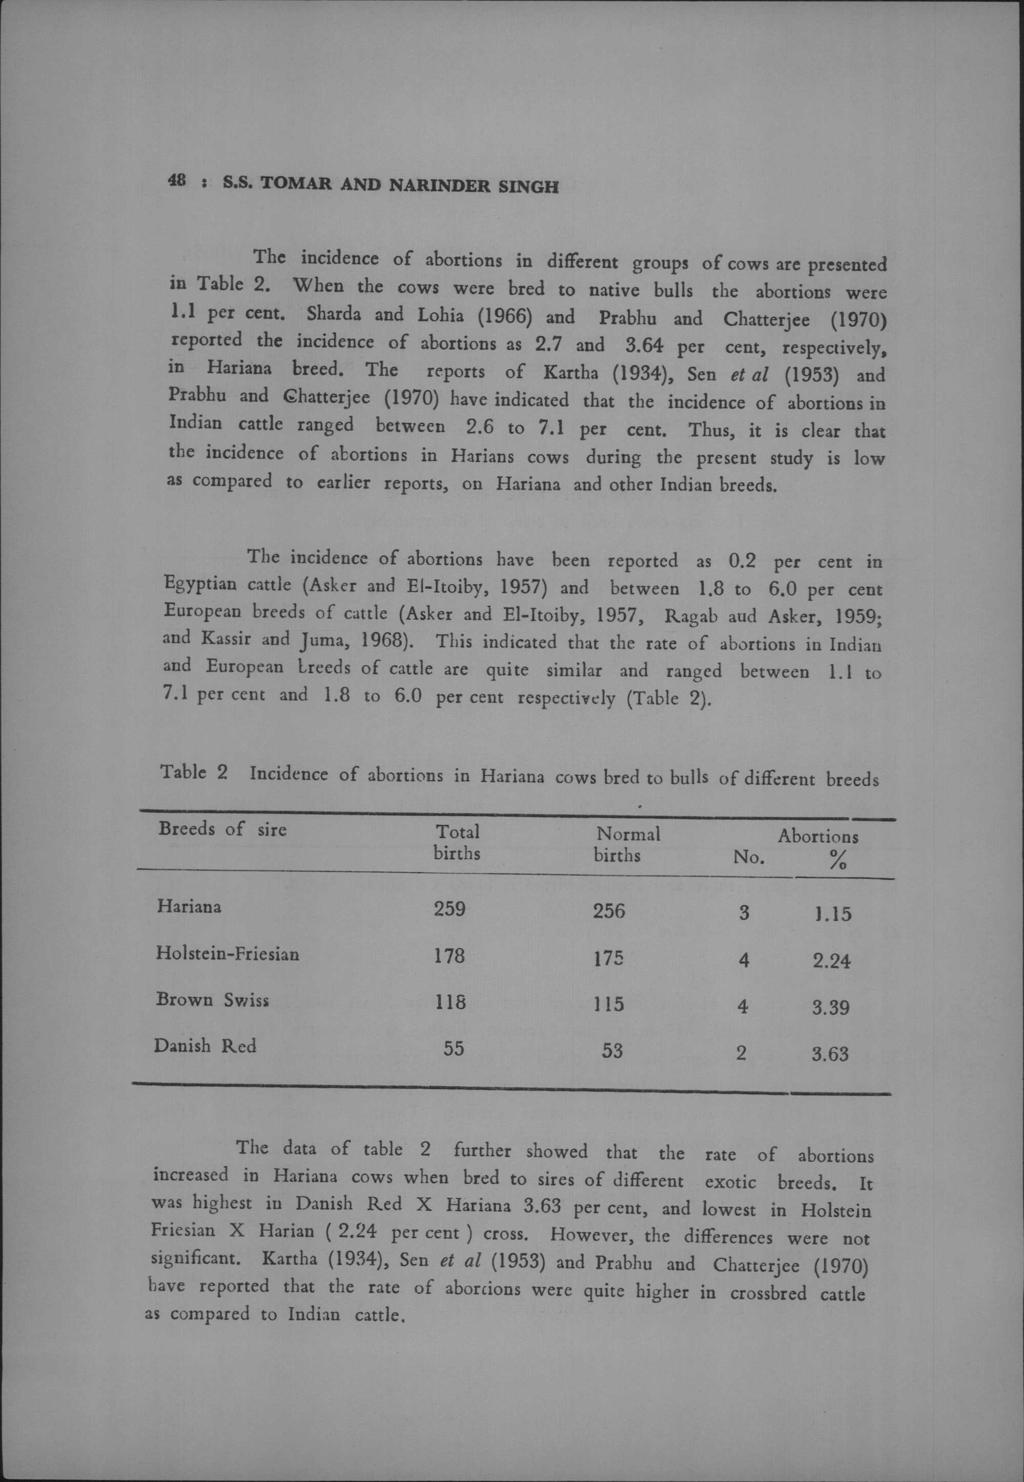 48 : S.S. TOMAR AND NARINDER SINGH The incidence of abortions in different groups of cows are presented in Table 2. When the cows were bred to native bulls the abortions were 1.1 per cent.